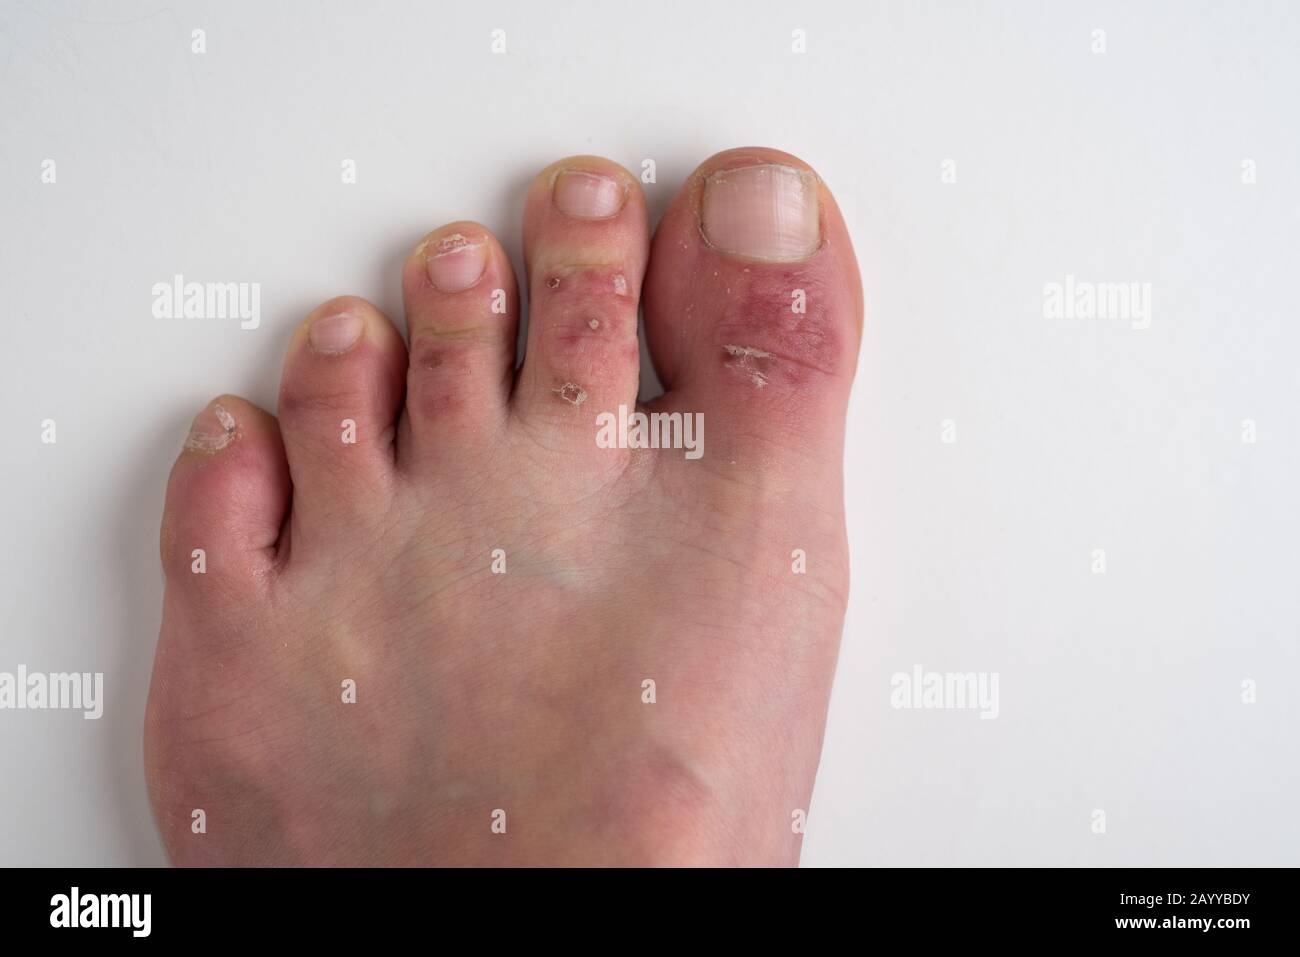 Amman/ Jordan - February 05 2020, Dermatitis also known and Eczema, causing rash, dryness, itchiness on feet of a 40 year old female Stock Photo